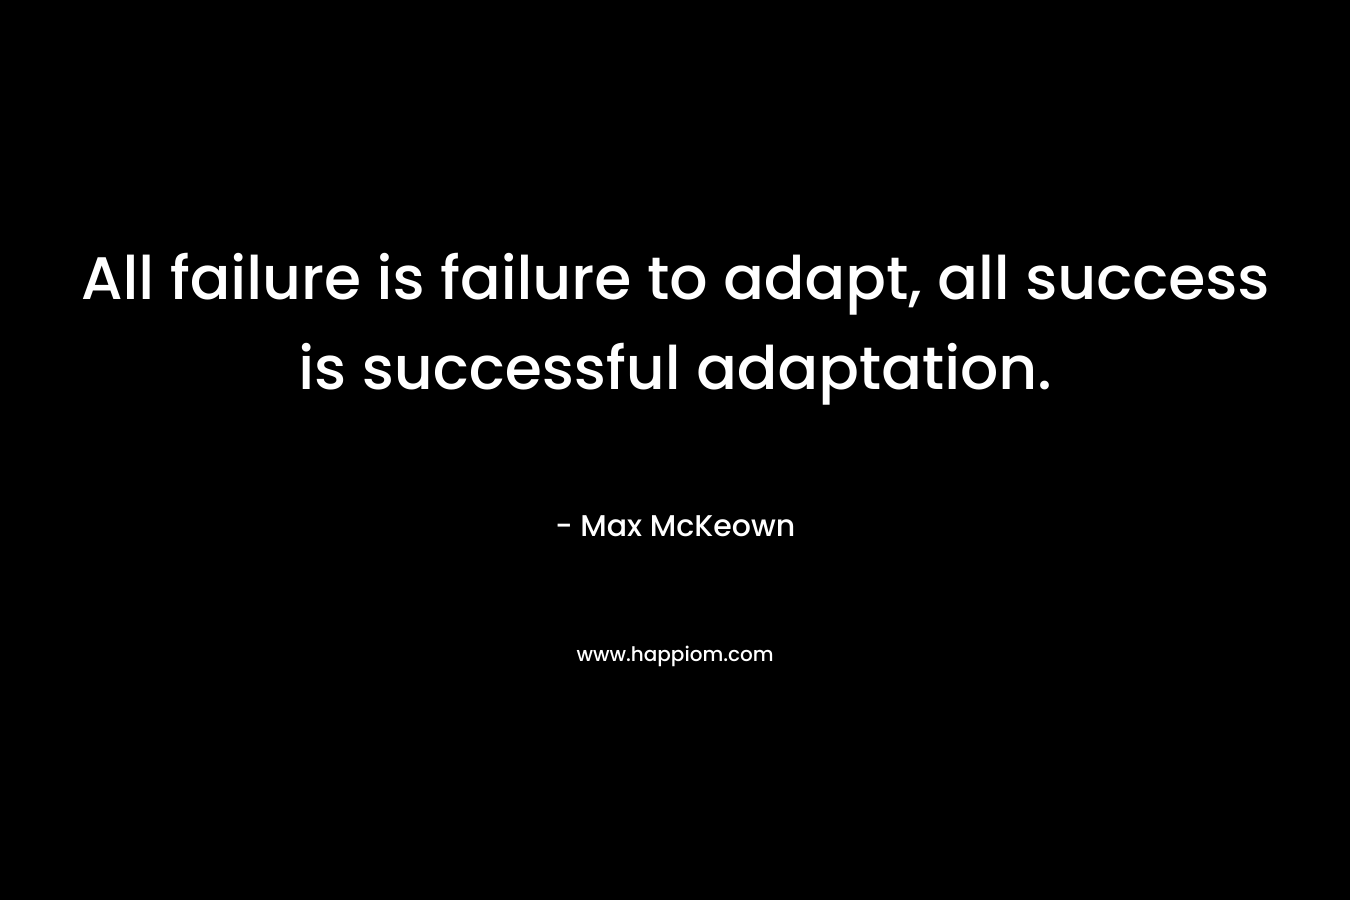 All failure is failure to adapt, all success is successful adaptation.